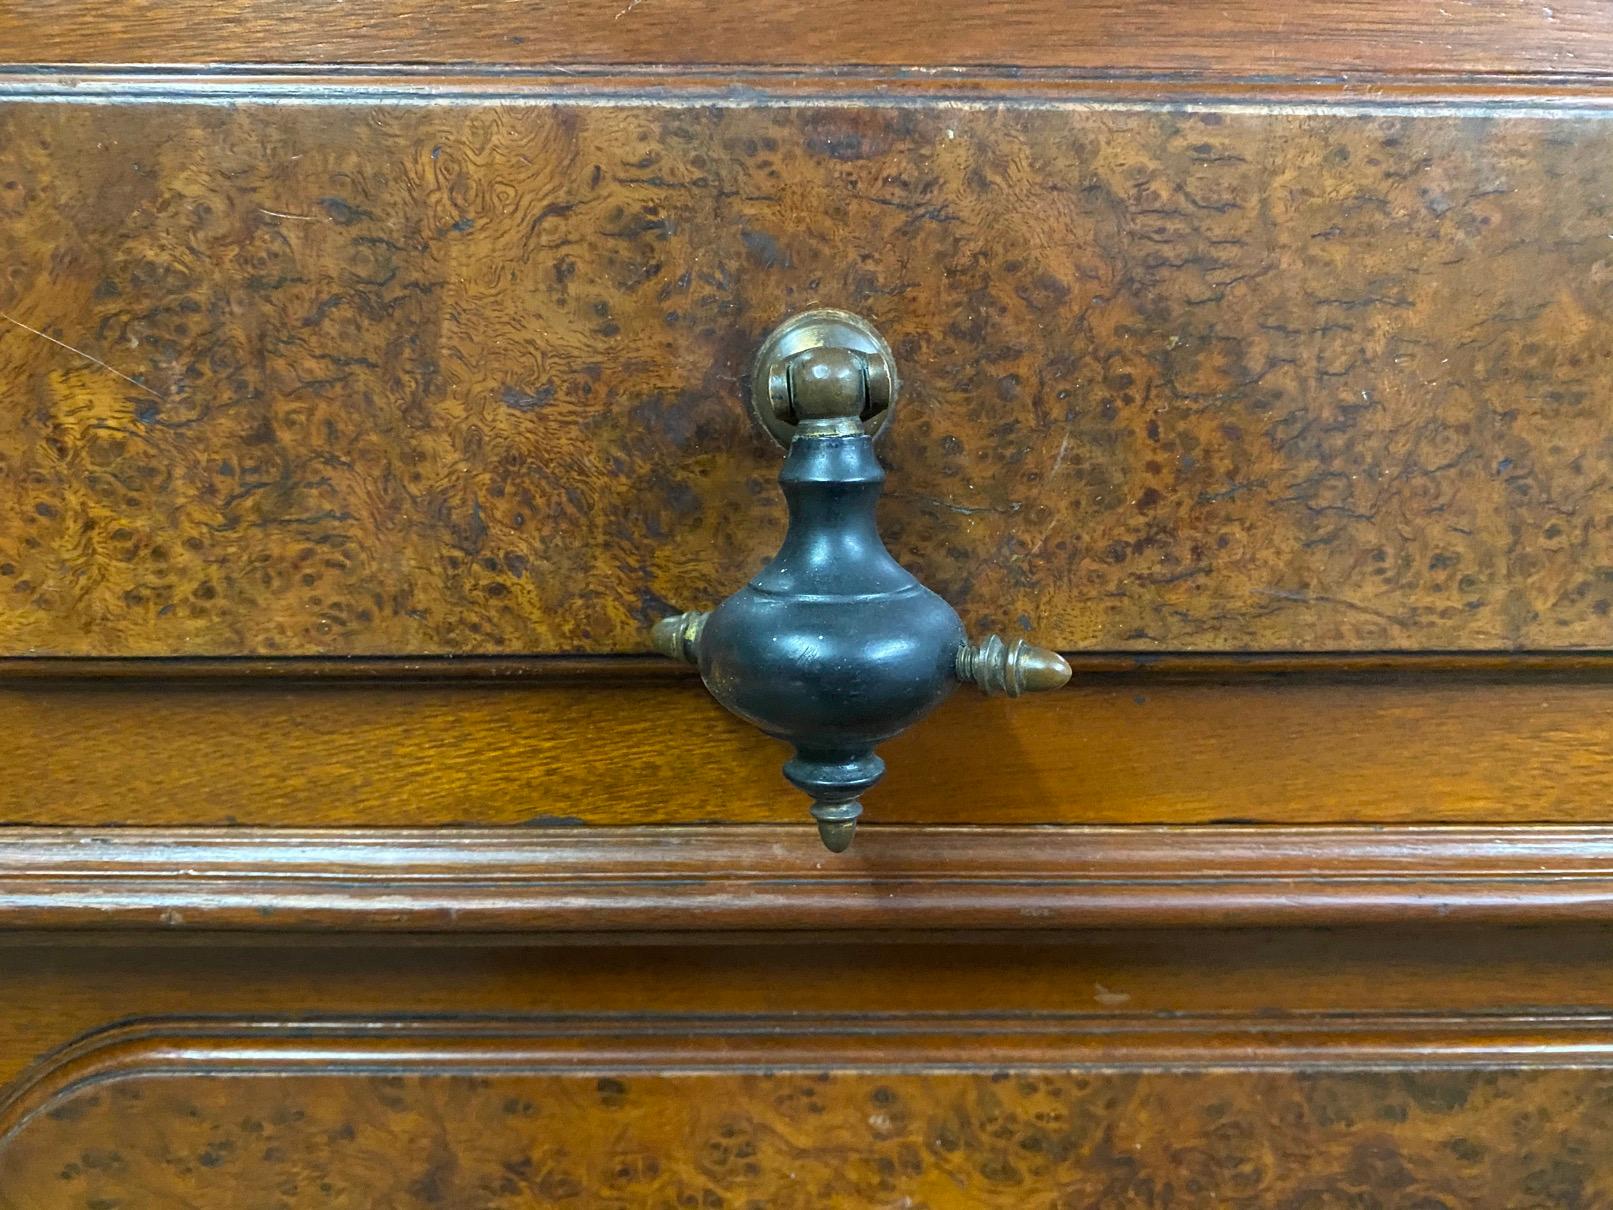 antique marble top chest of drawers